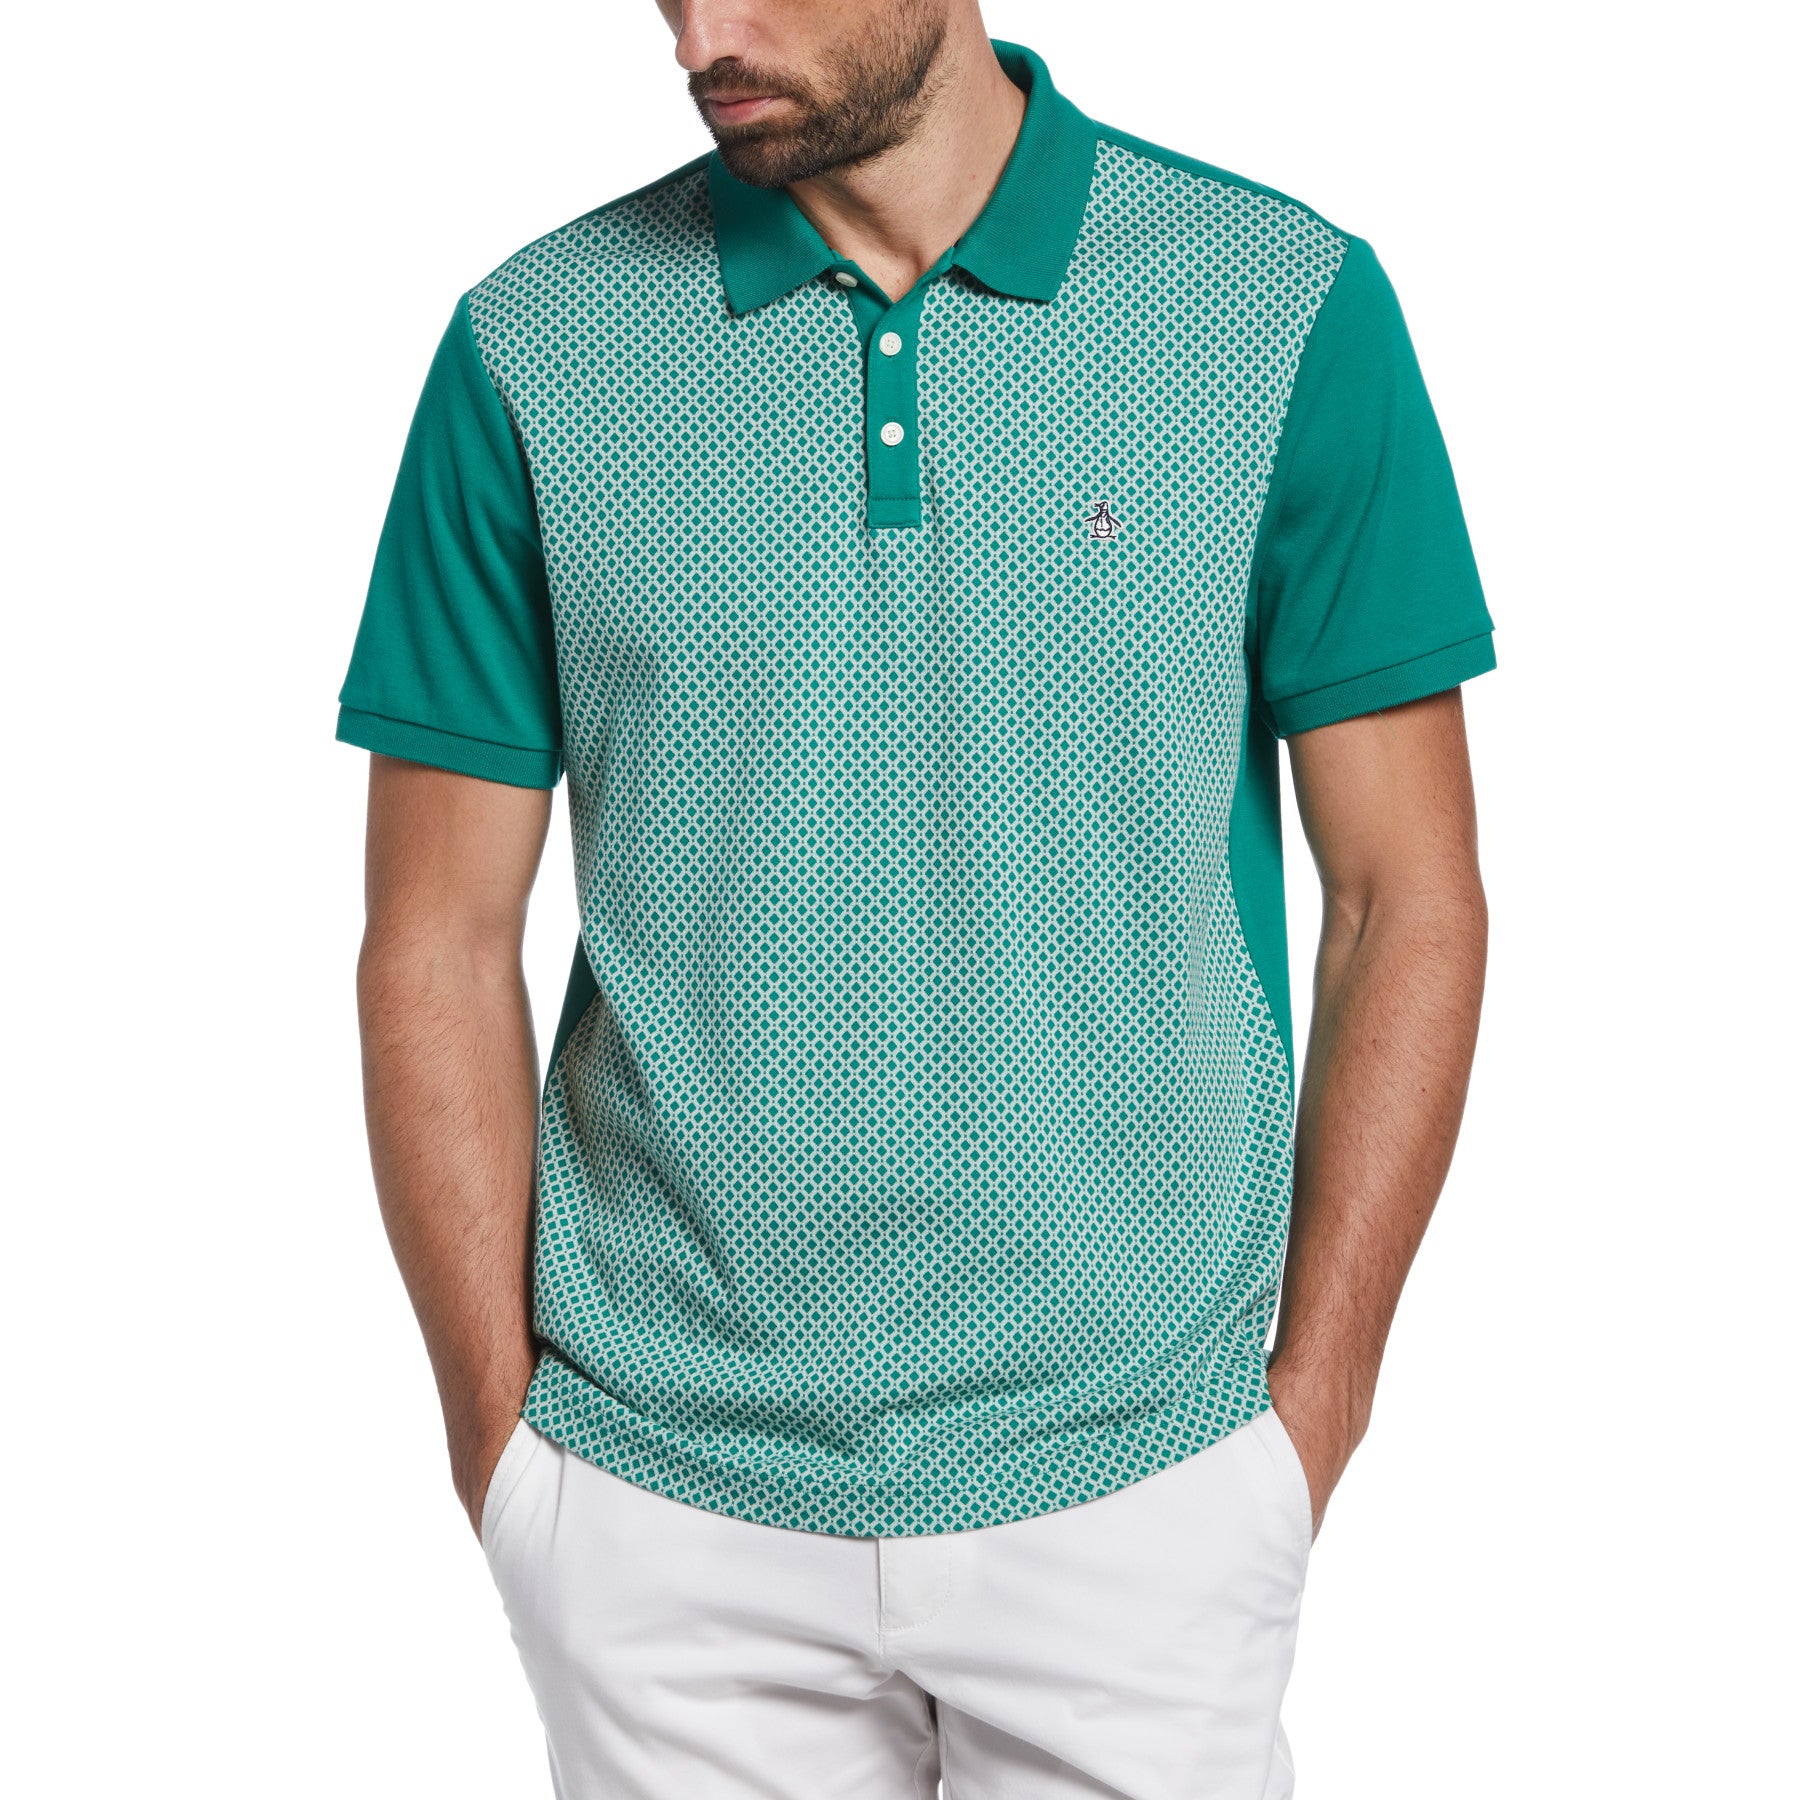 View Jacquard Front Polo Shirt In Shady Glade information